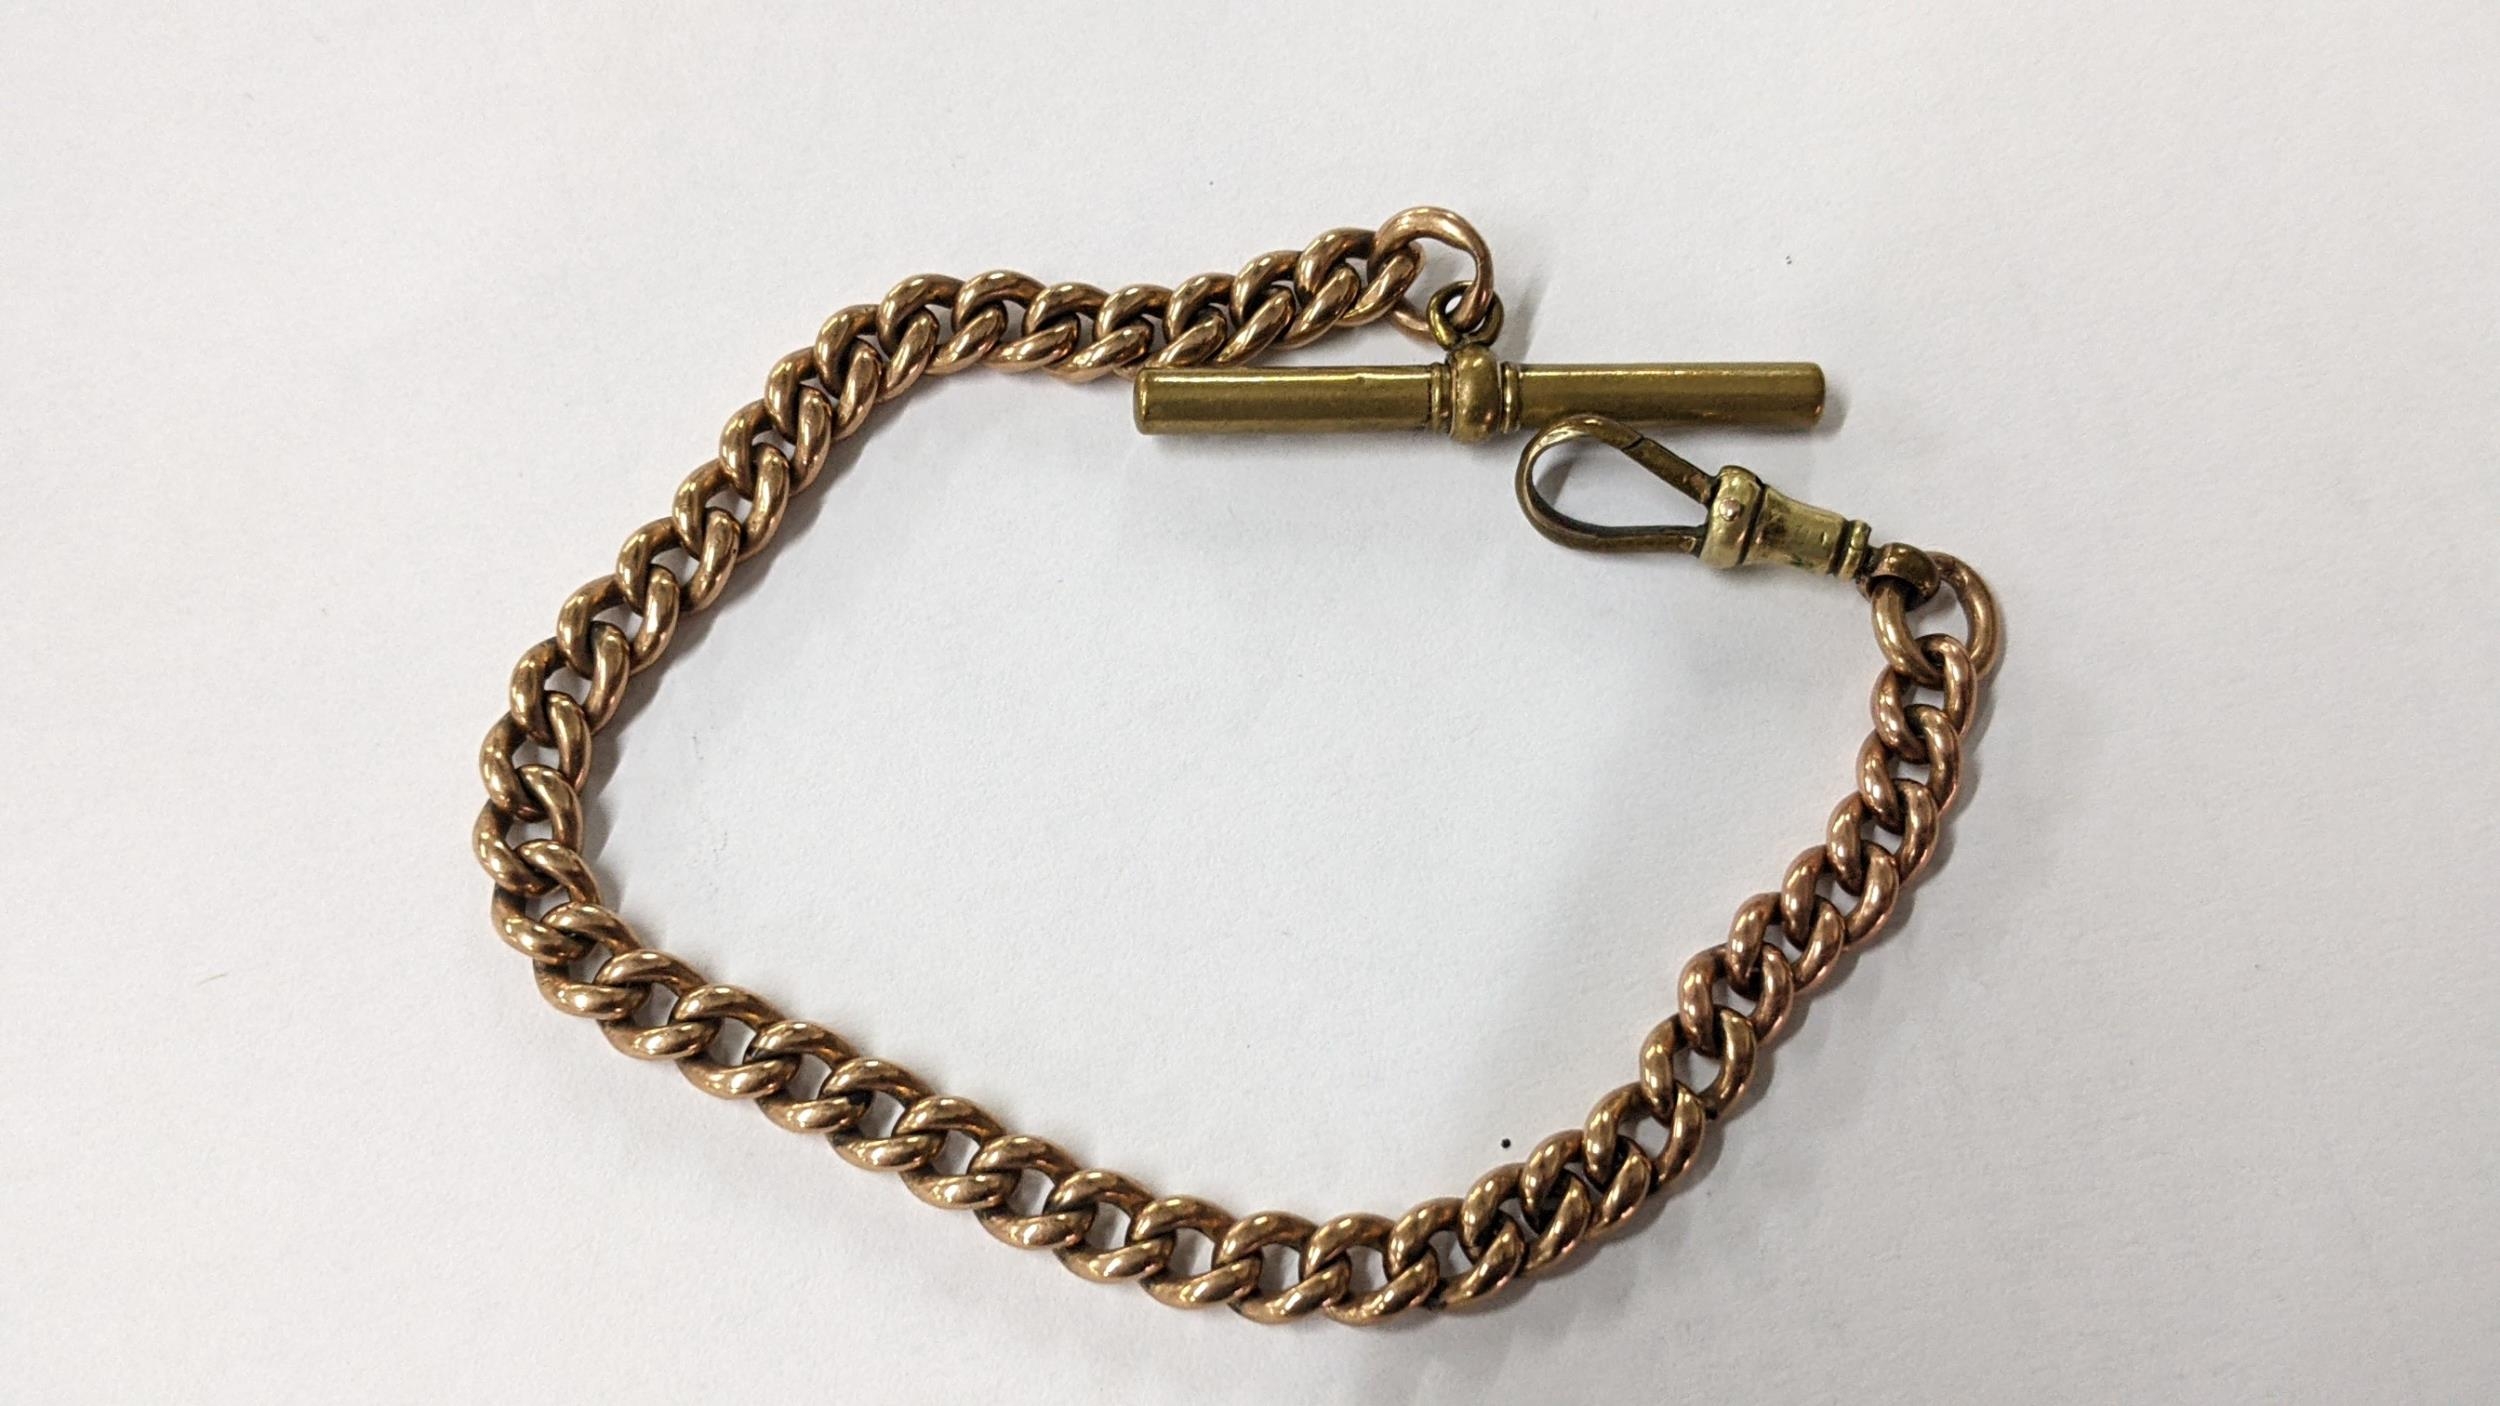 A 9ct rose gold pocket watch chain with a metal bulldog clip and T-bar, weight excluding bulldog